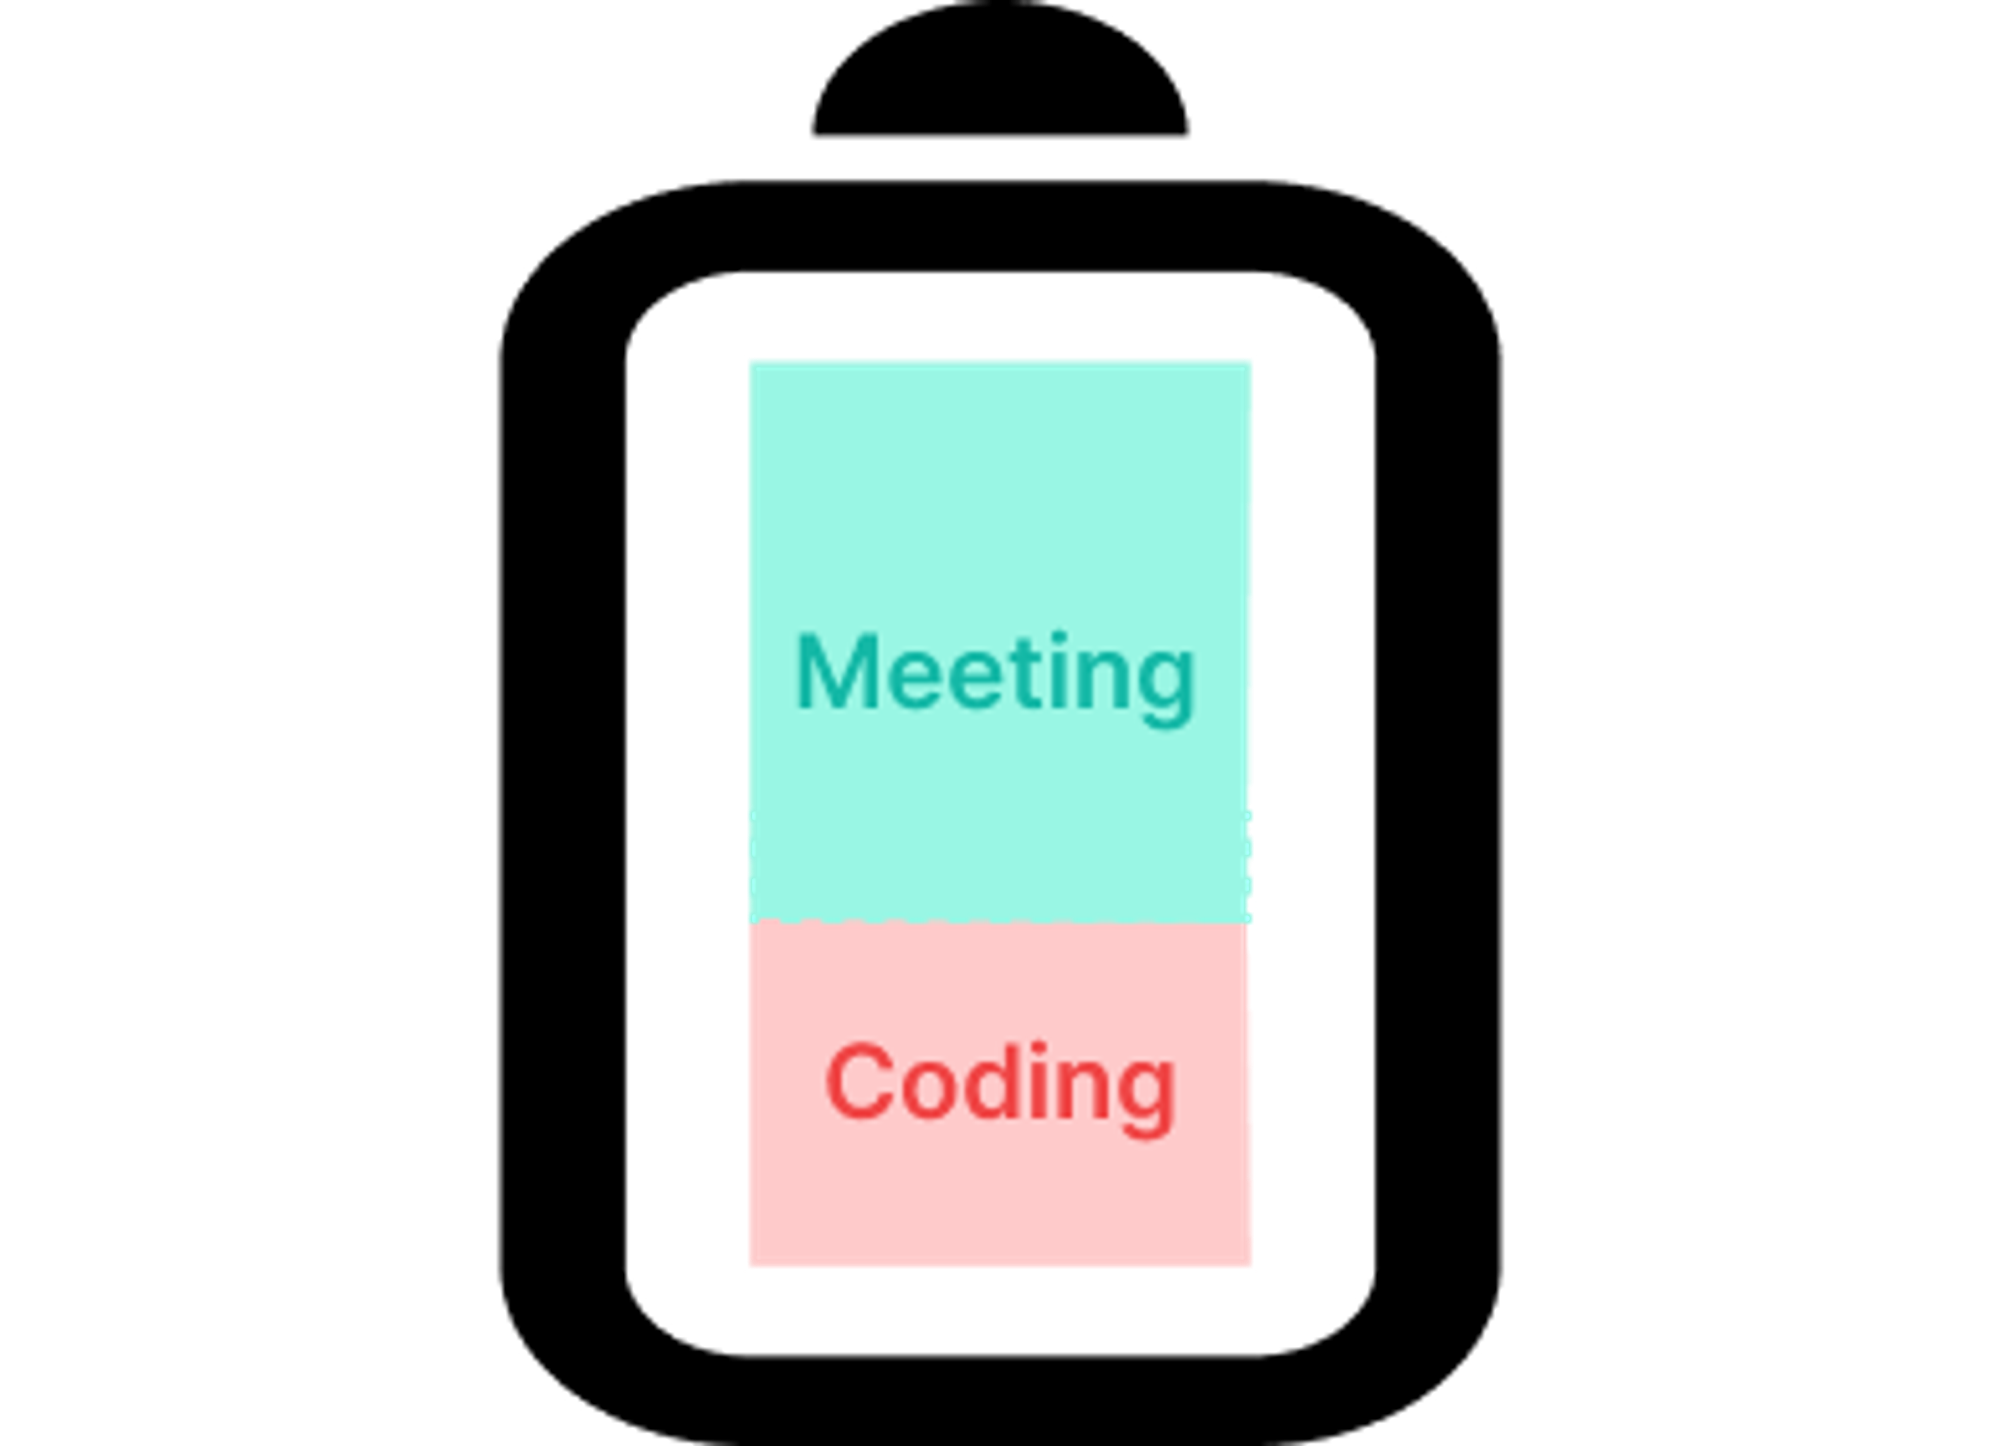 Meeting first, coding second